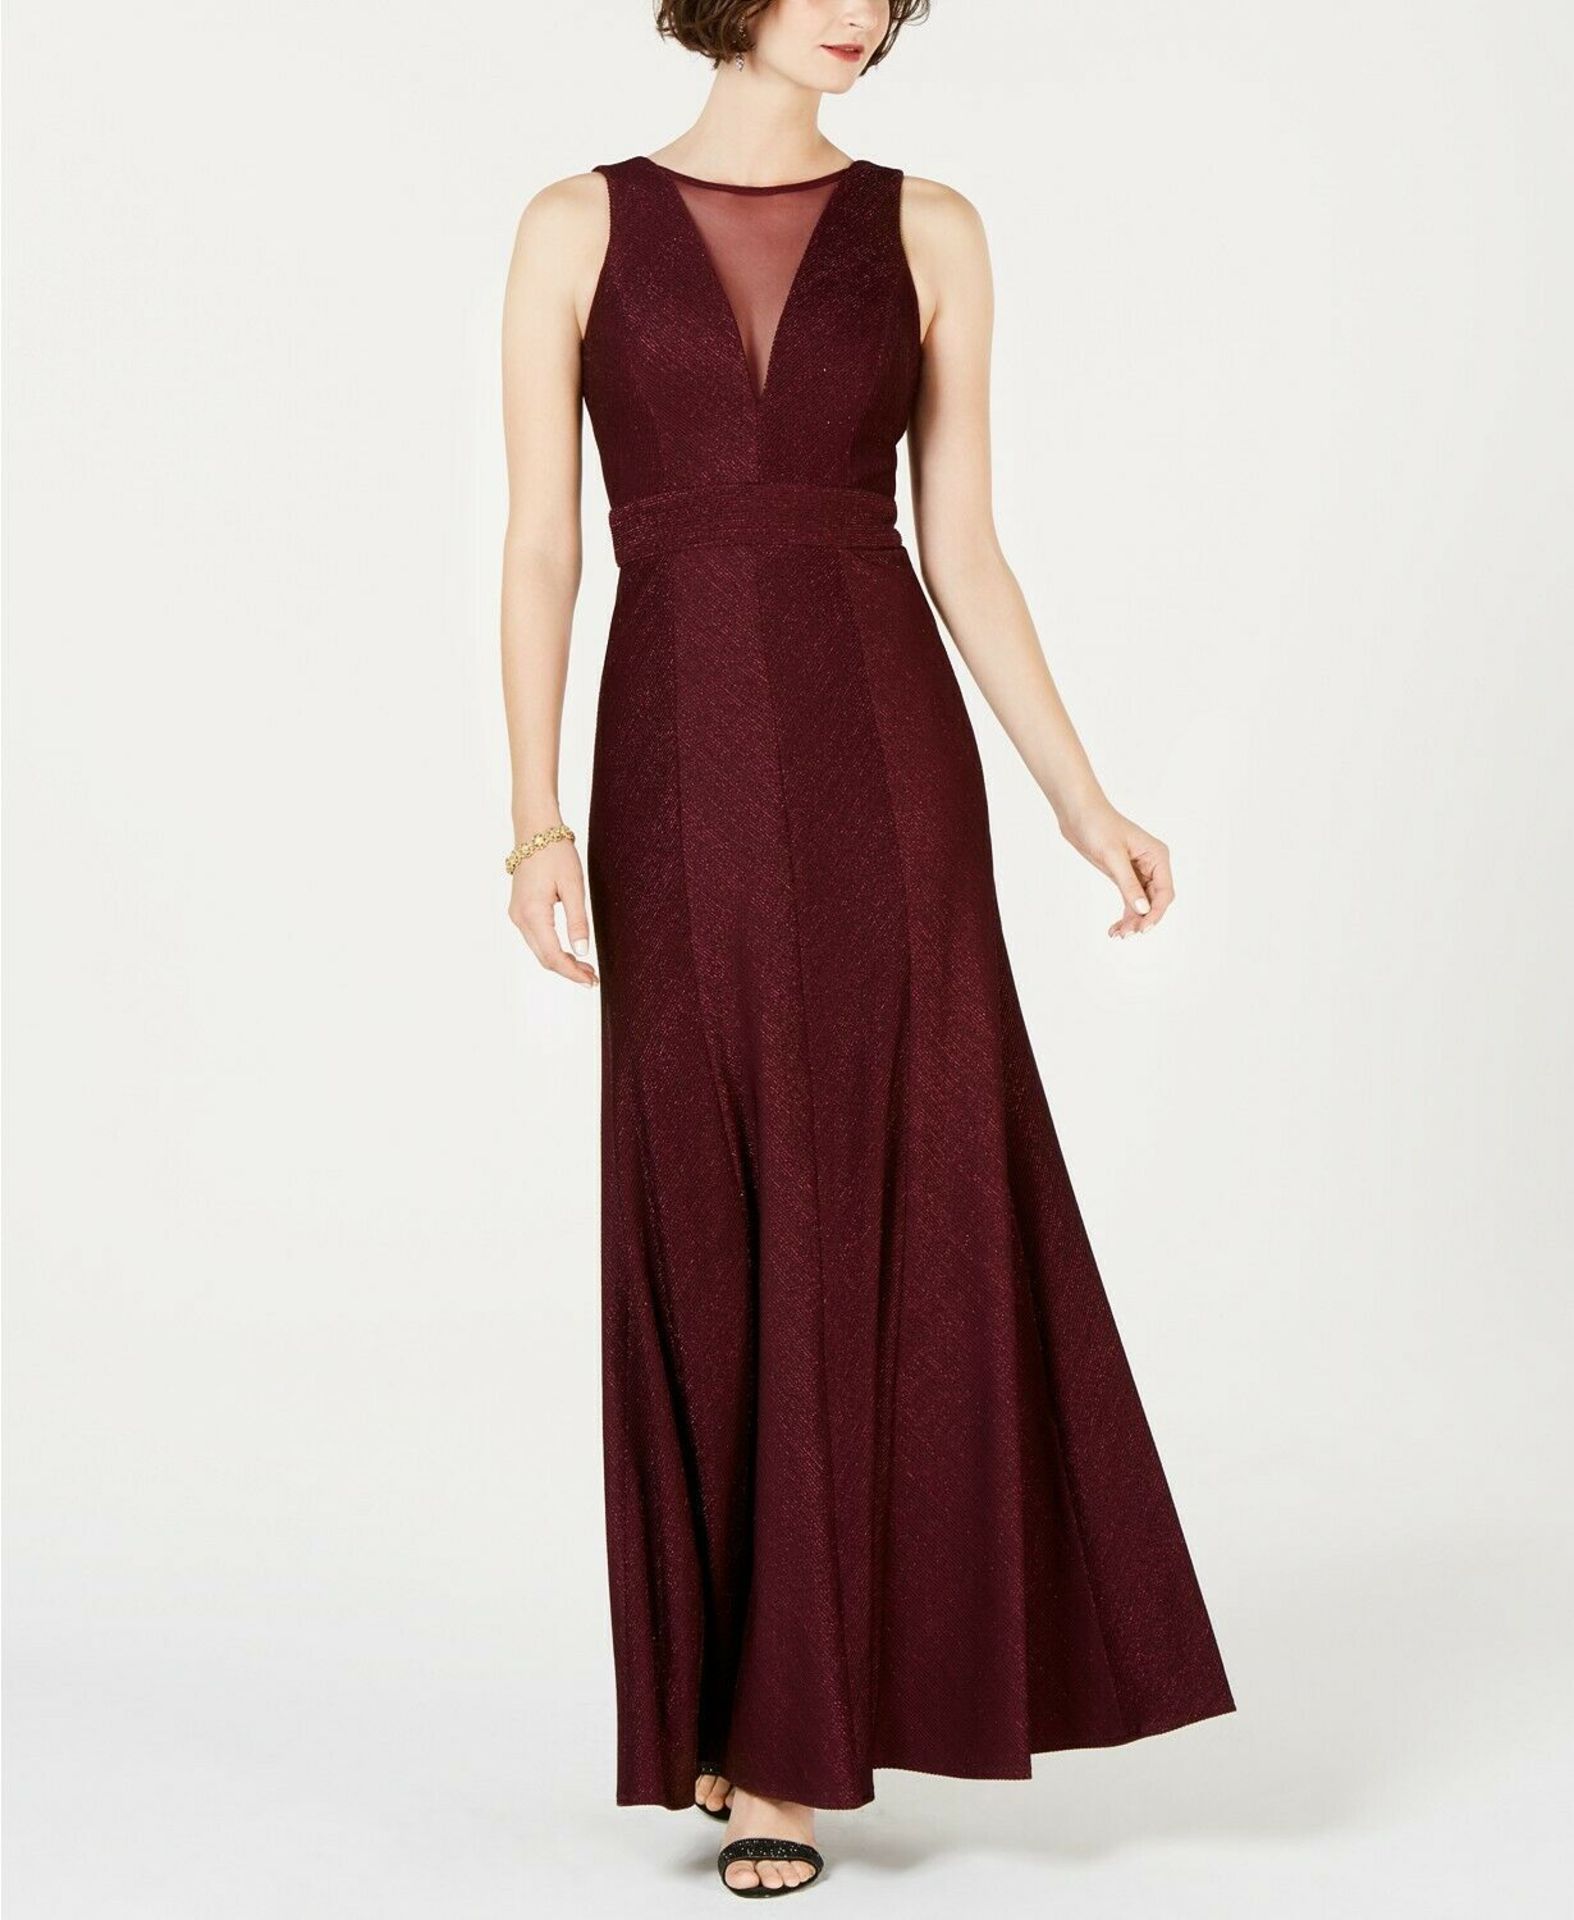 Nightway Petite Metallic Ribbed-Knit Gown Uk 14P Colour Wine Rrp £124